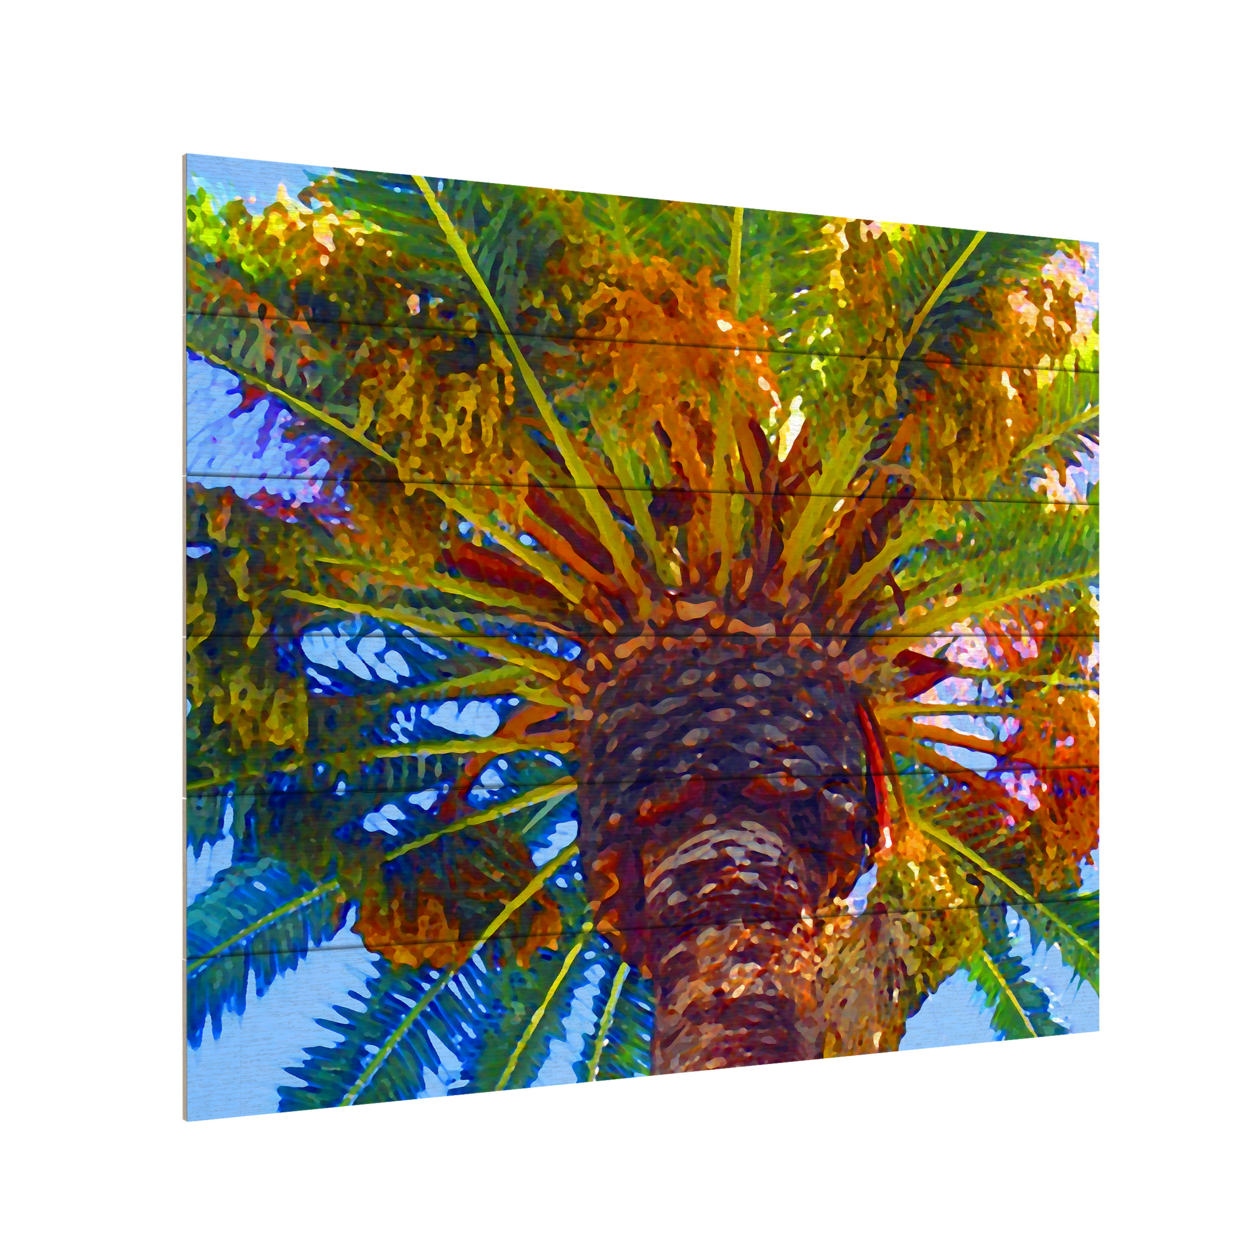 Wooden Slat Art 18 X 22 Inches Titled Palm Tree Looking Up Ready To Hang Home Decor Picture